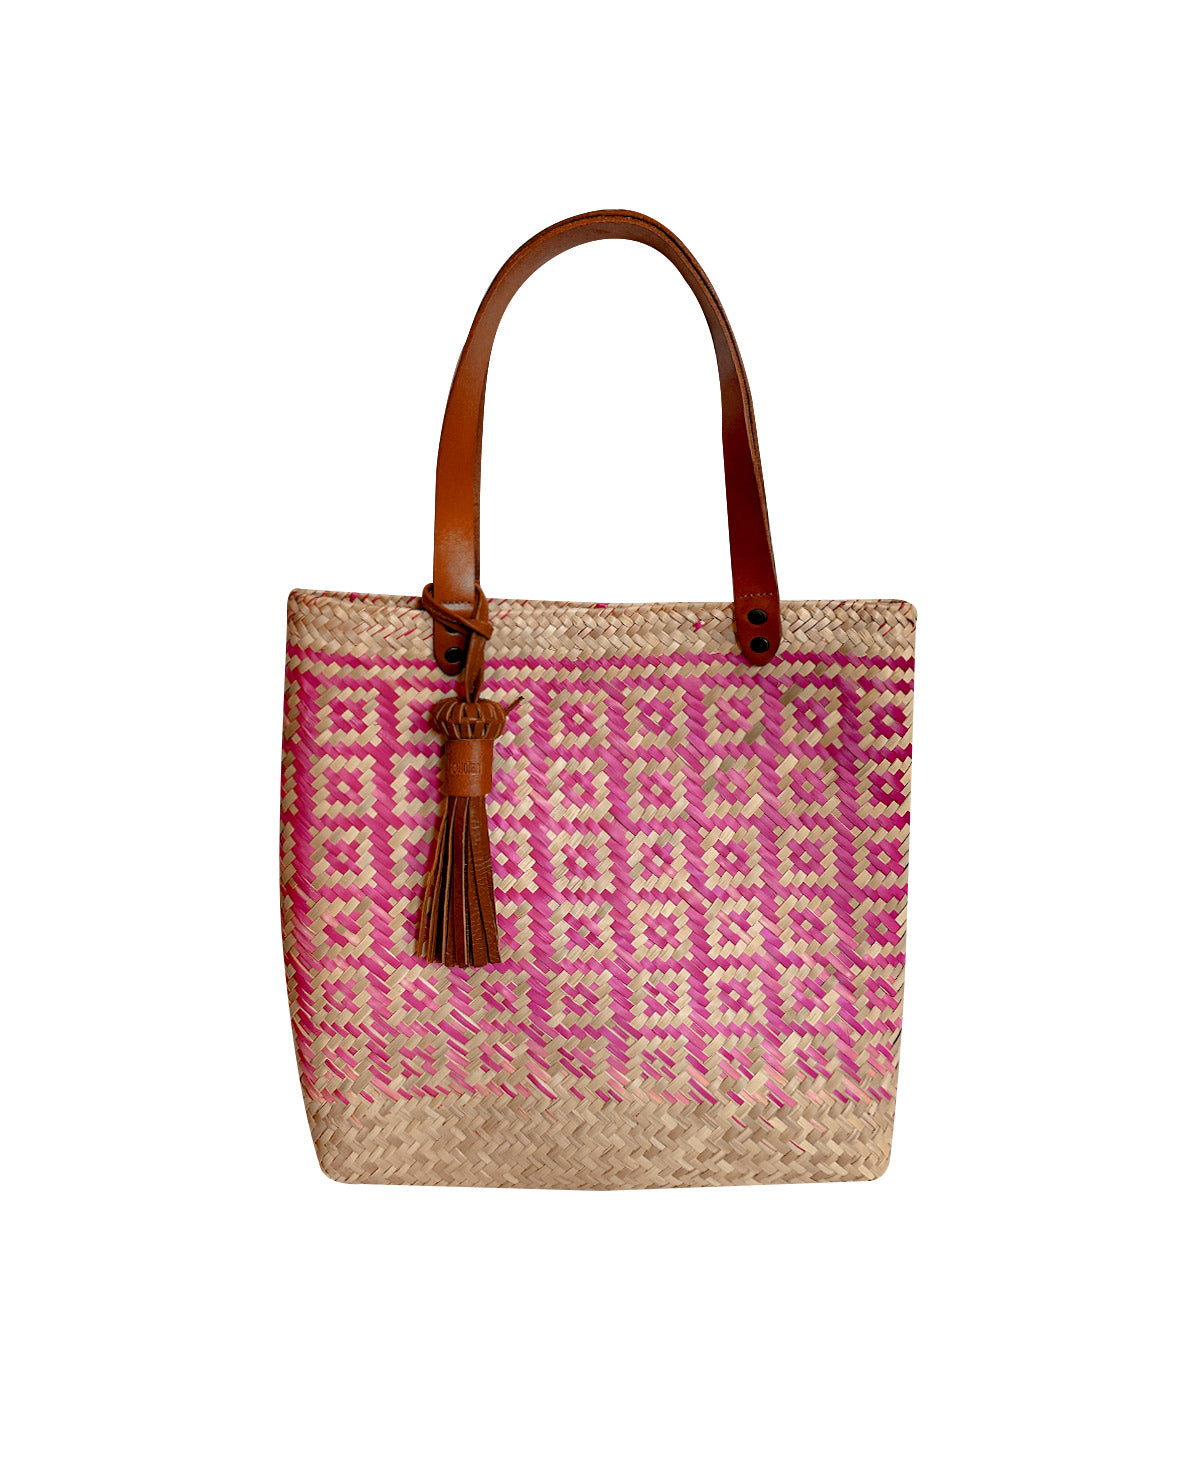 Copy of Keta tan leather tote bag / pink squares hand woven palm